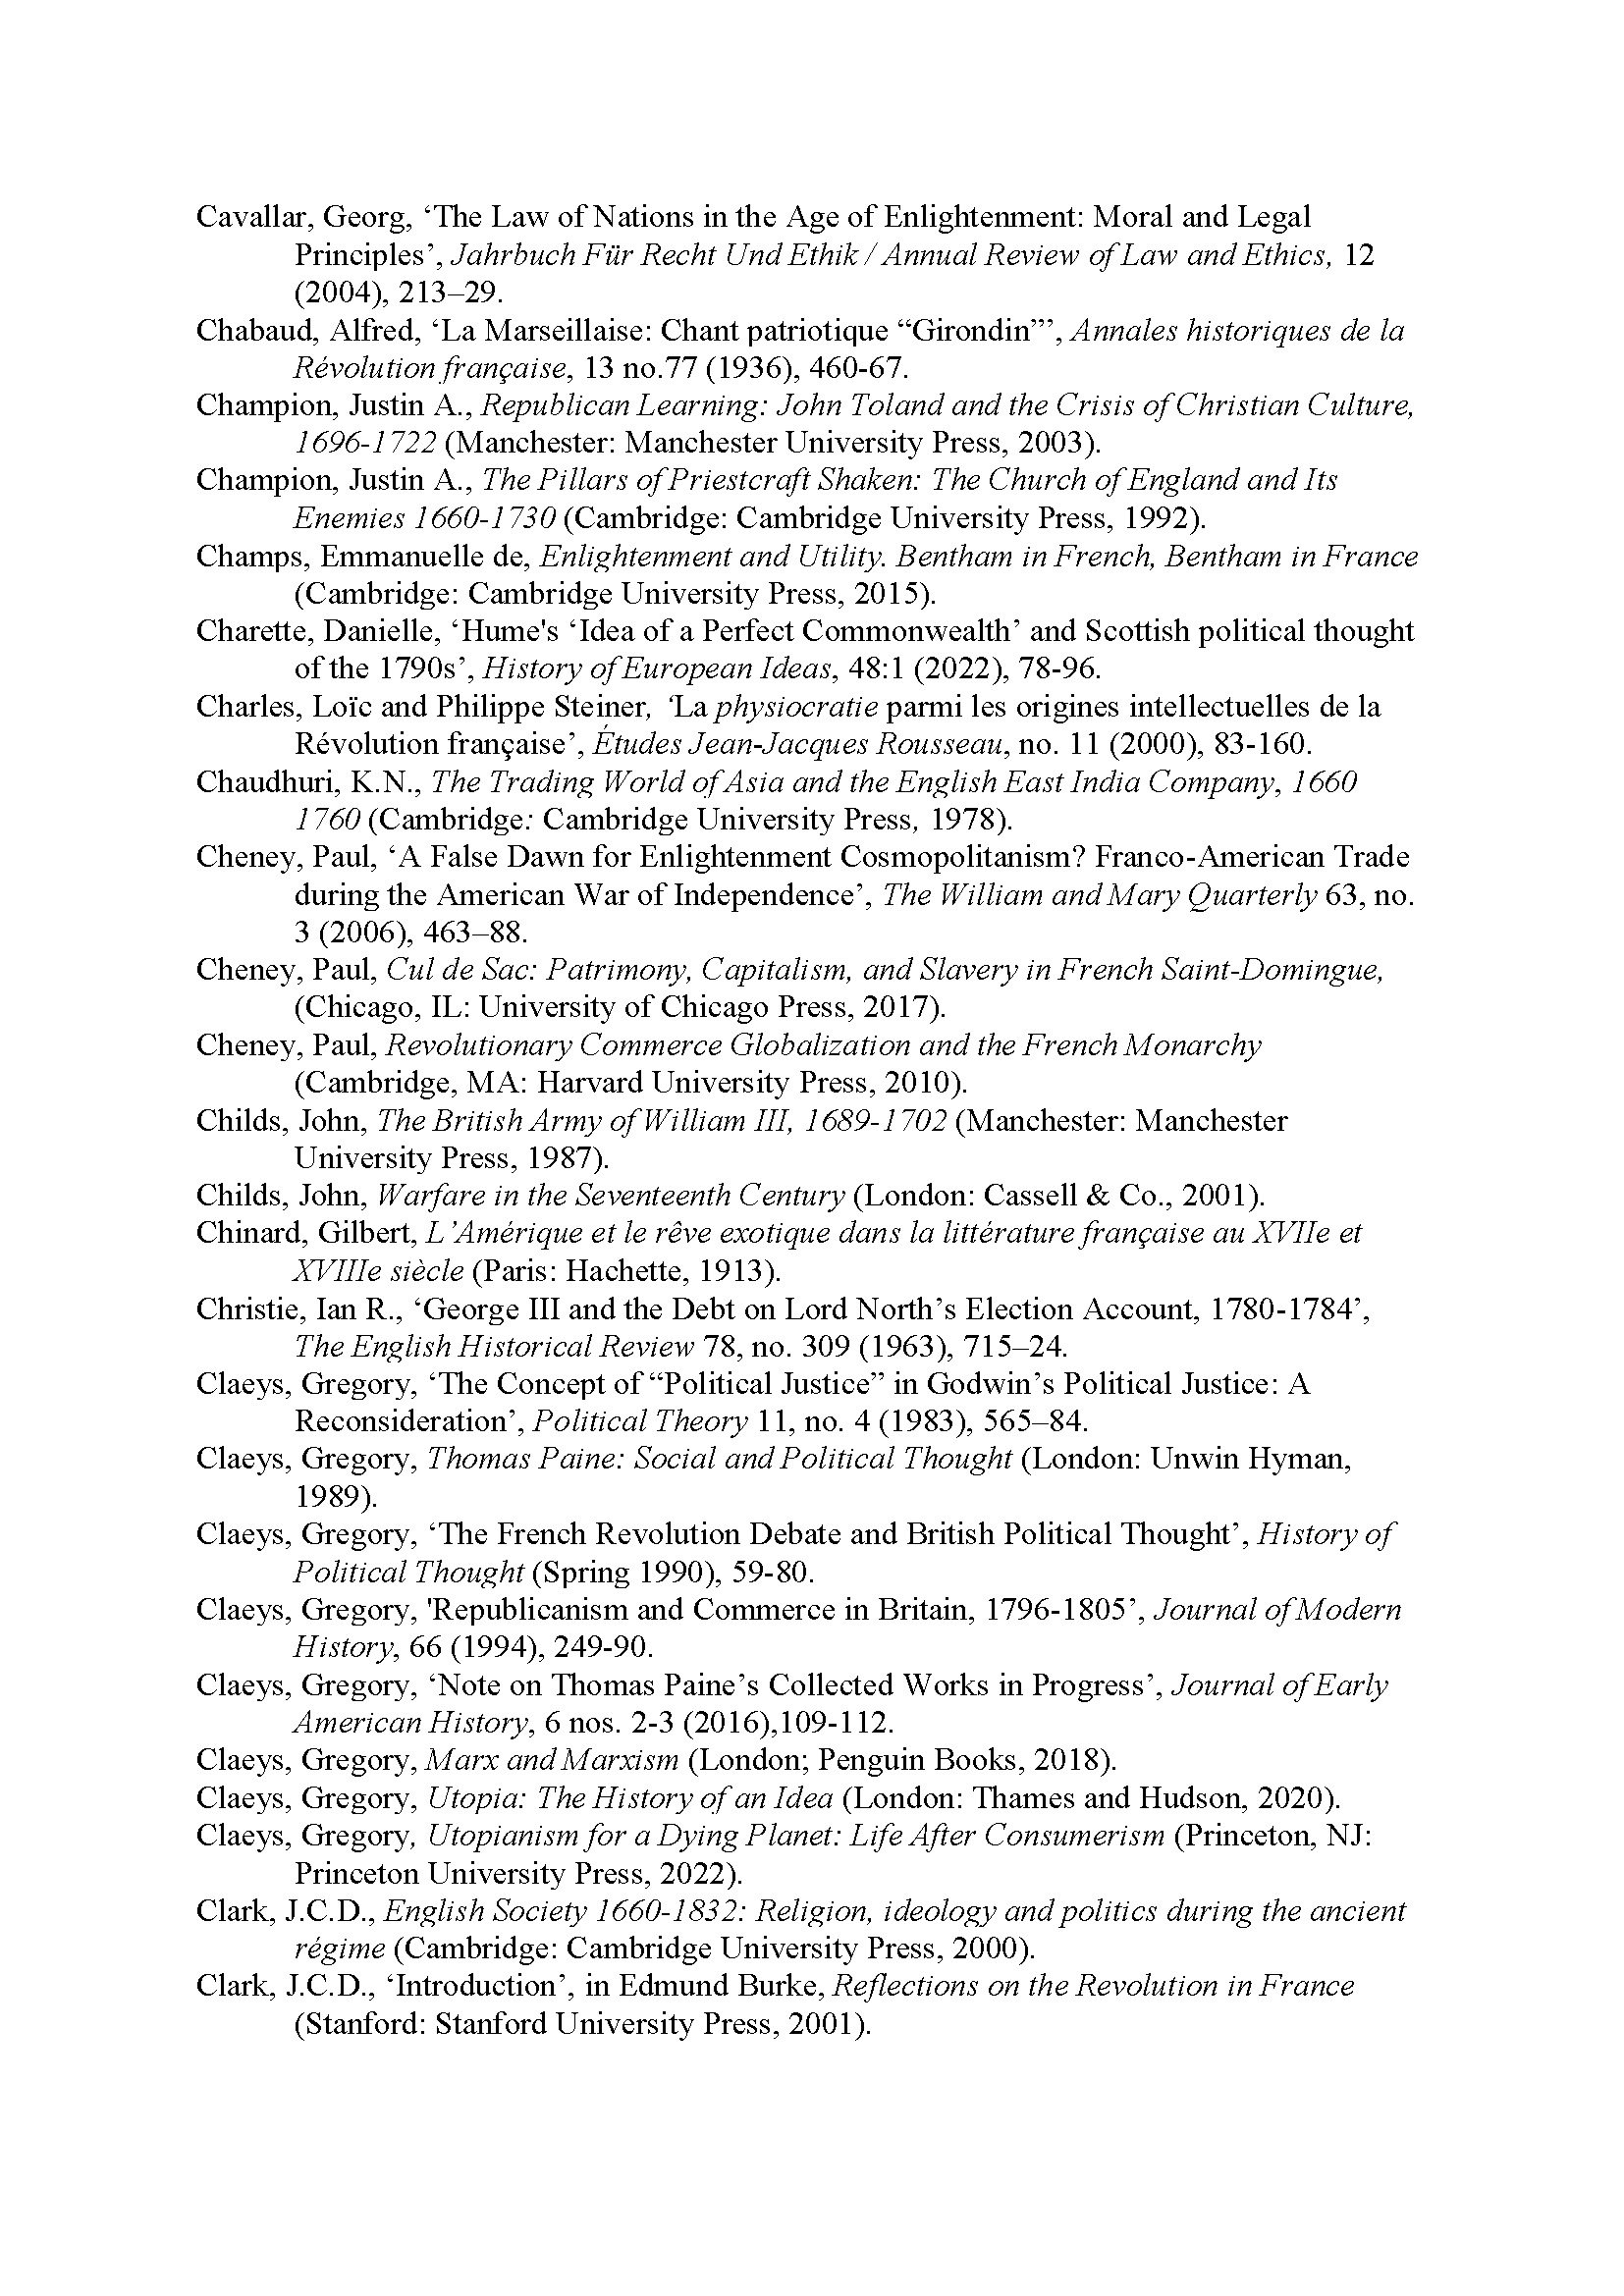 End of the Enlightment_Bibliography[25]_Page_09.jpg